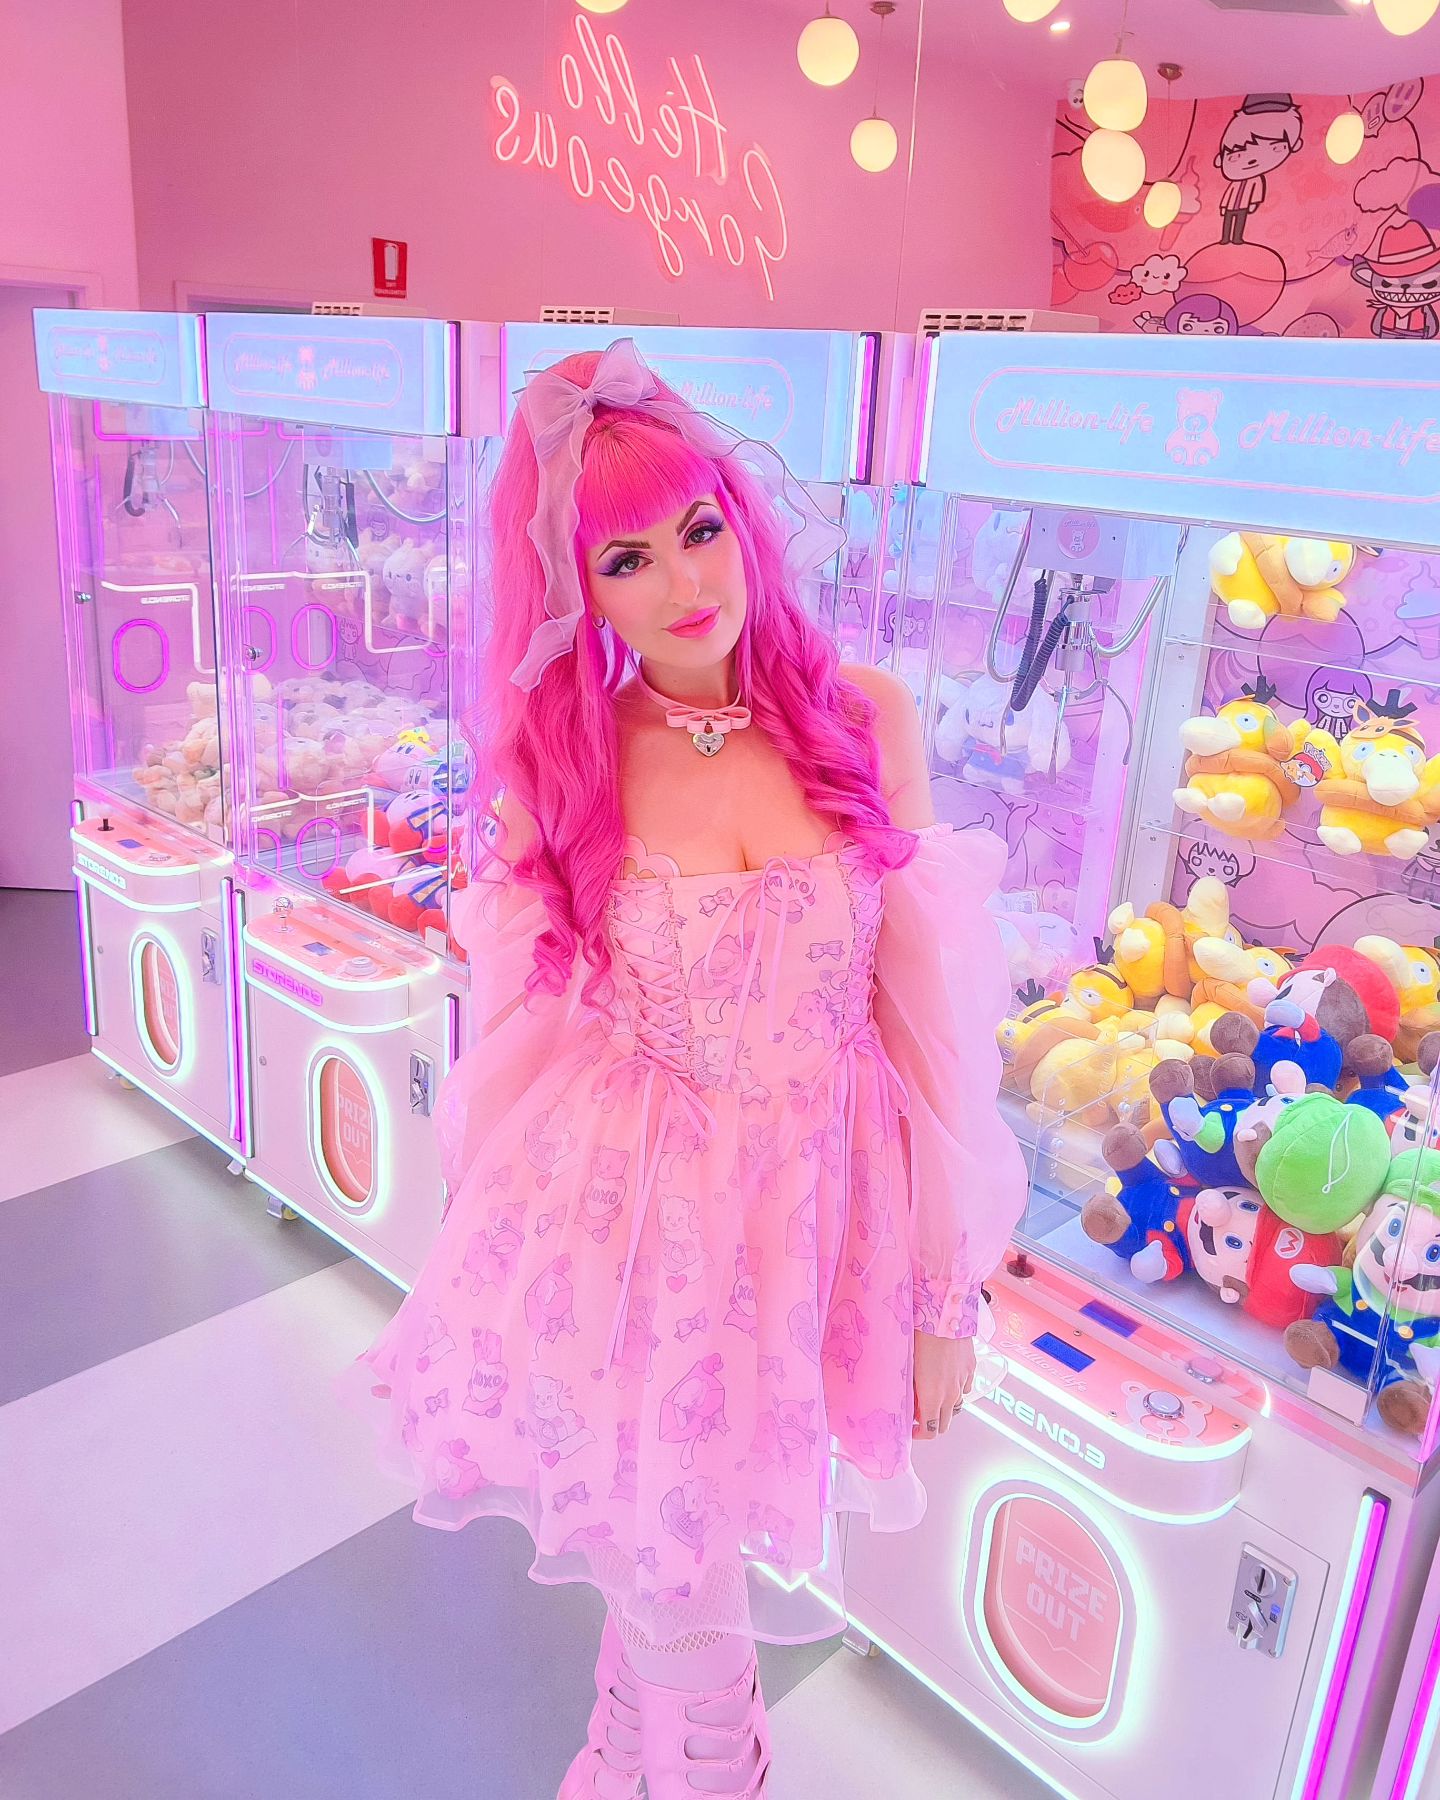 🩷🌸♡ITS MY BIRTHDAY!♡🌸🩷
Look I am late posting but it's better late then never♥︎

I had the best day today celebrating with friends and loved ones!

#egirl #shopmyviolet #pink #pinkhair #birthday #alternative